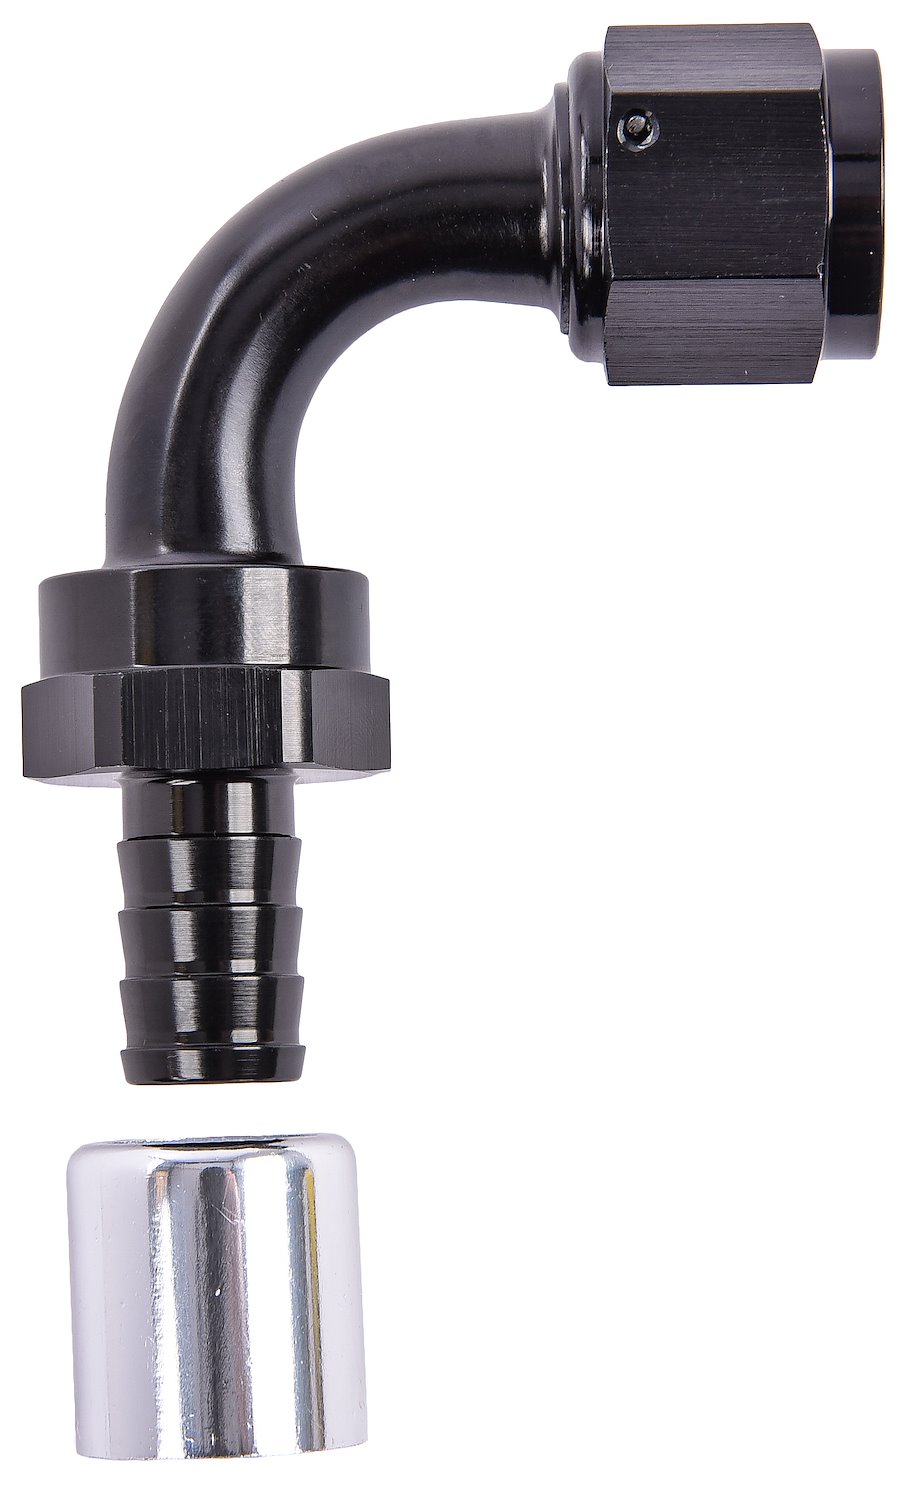 90-Degree AN Crimp-On Hose End Fitting [-10 AN Female to -10 AN Hose, Black]